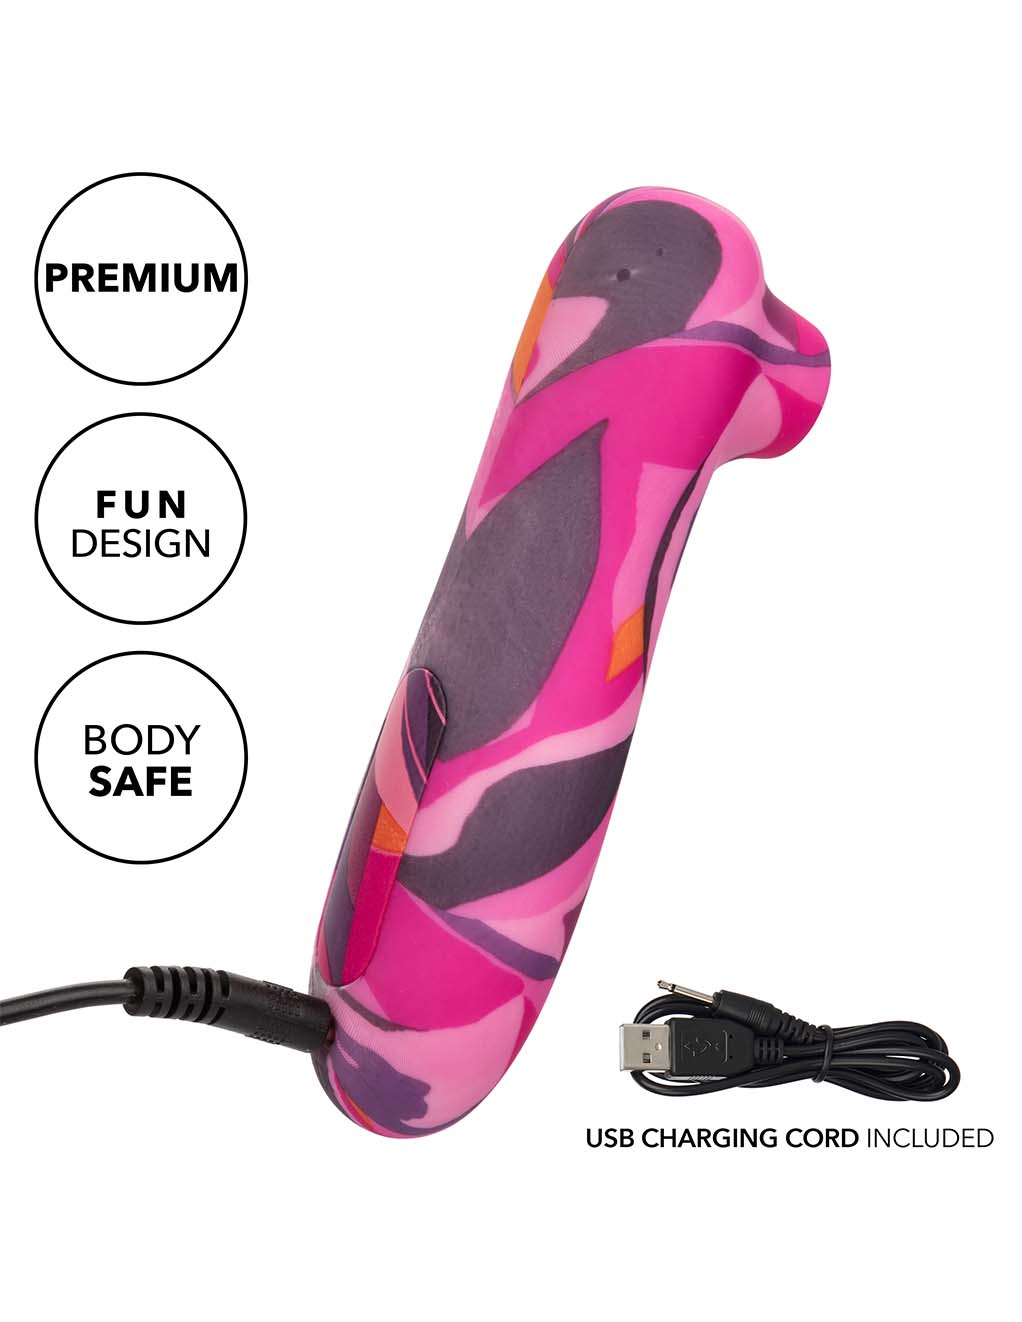 Naughty Bits Suck Buddy Massager- Charger